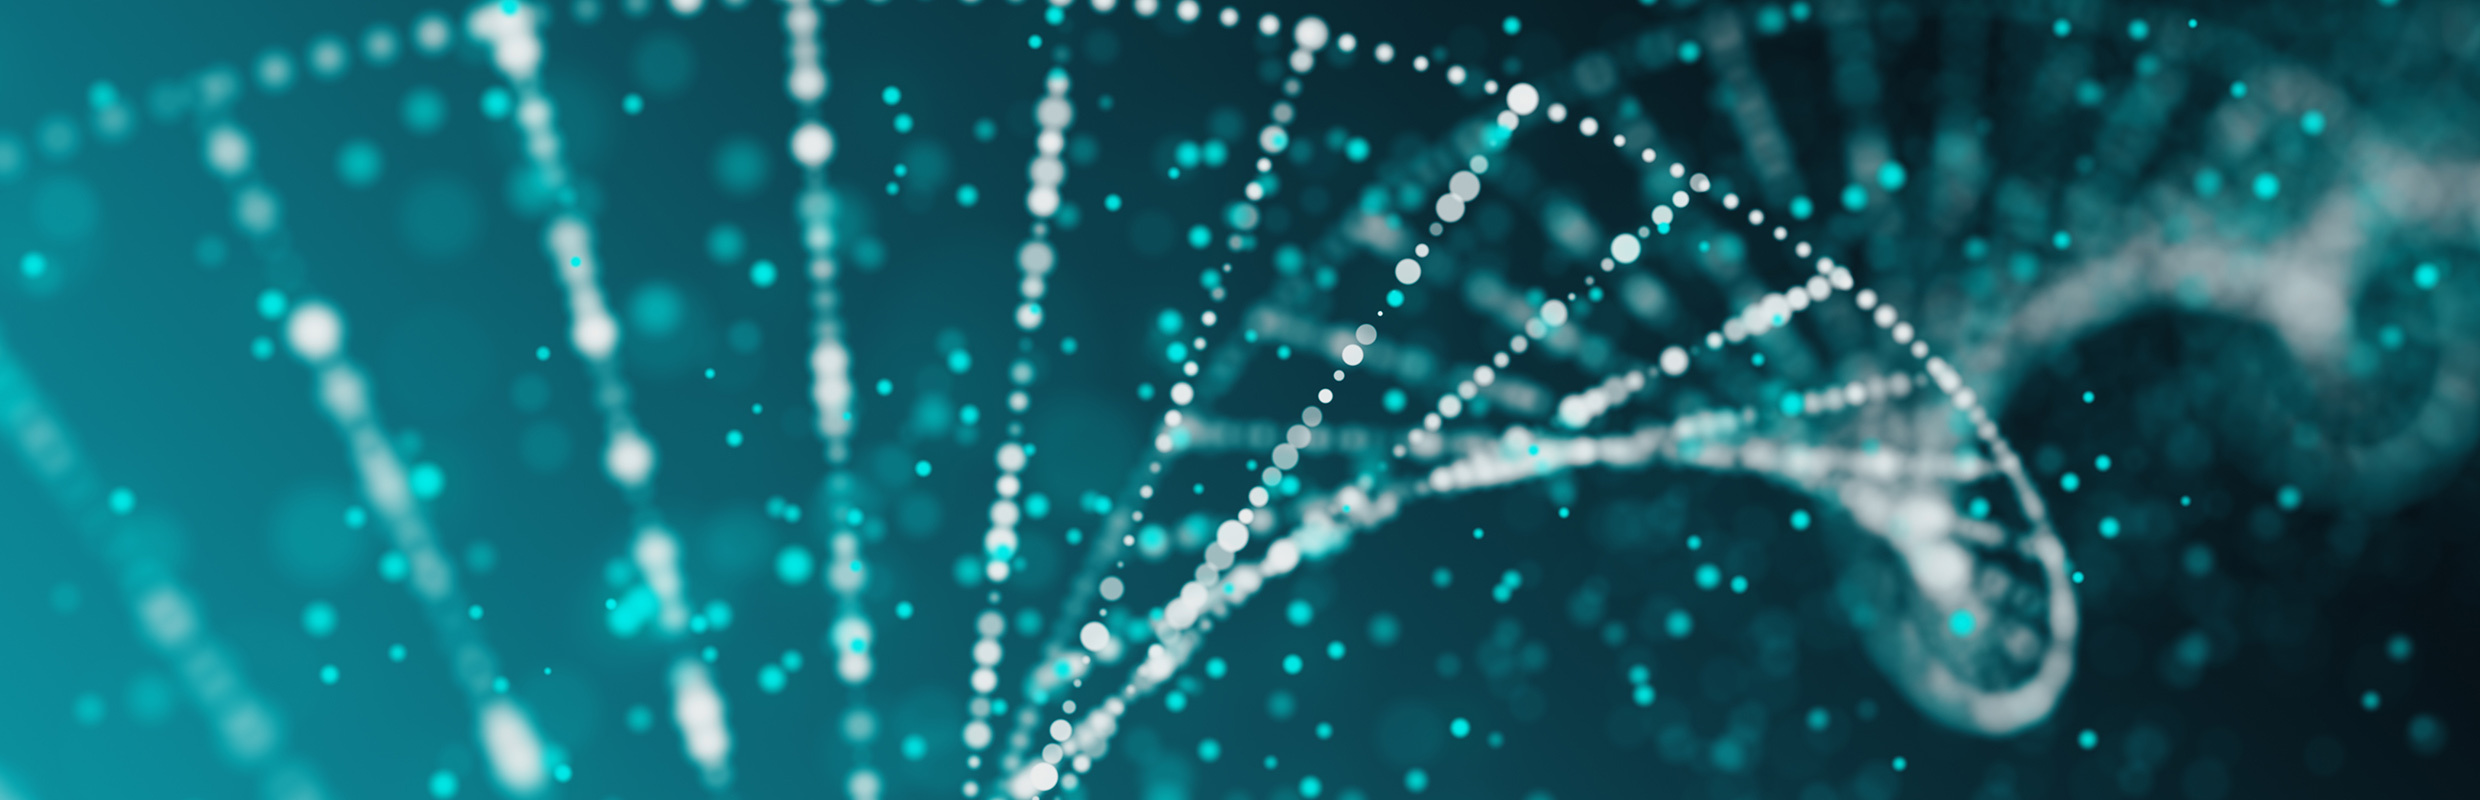 close up of a dna strand on a teal and black background